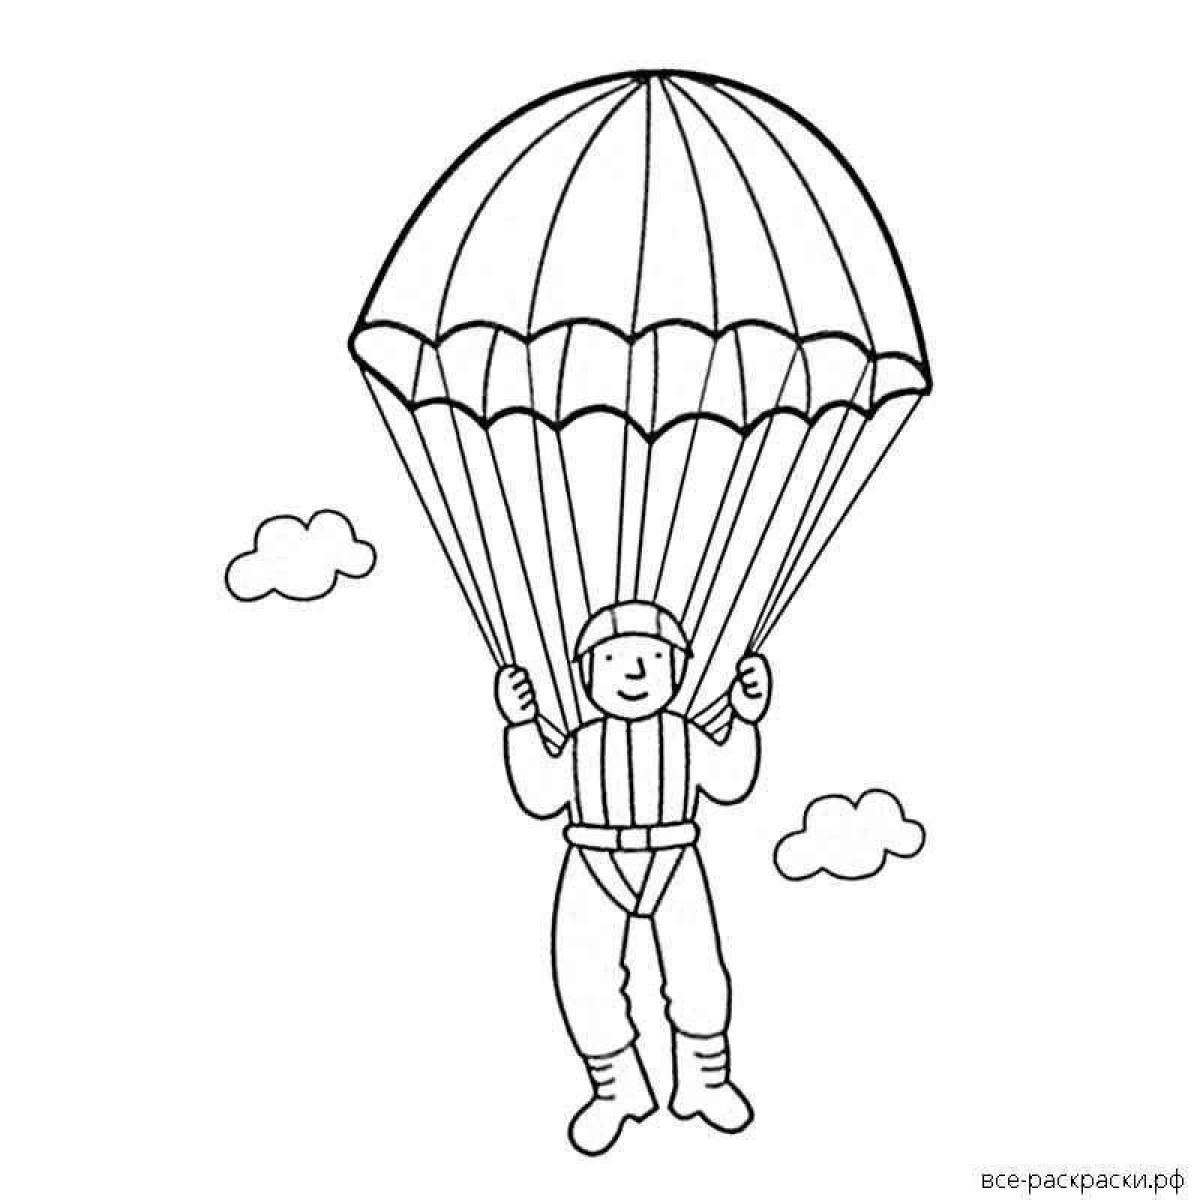 Flexible skydiver coloring page